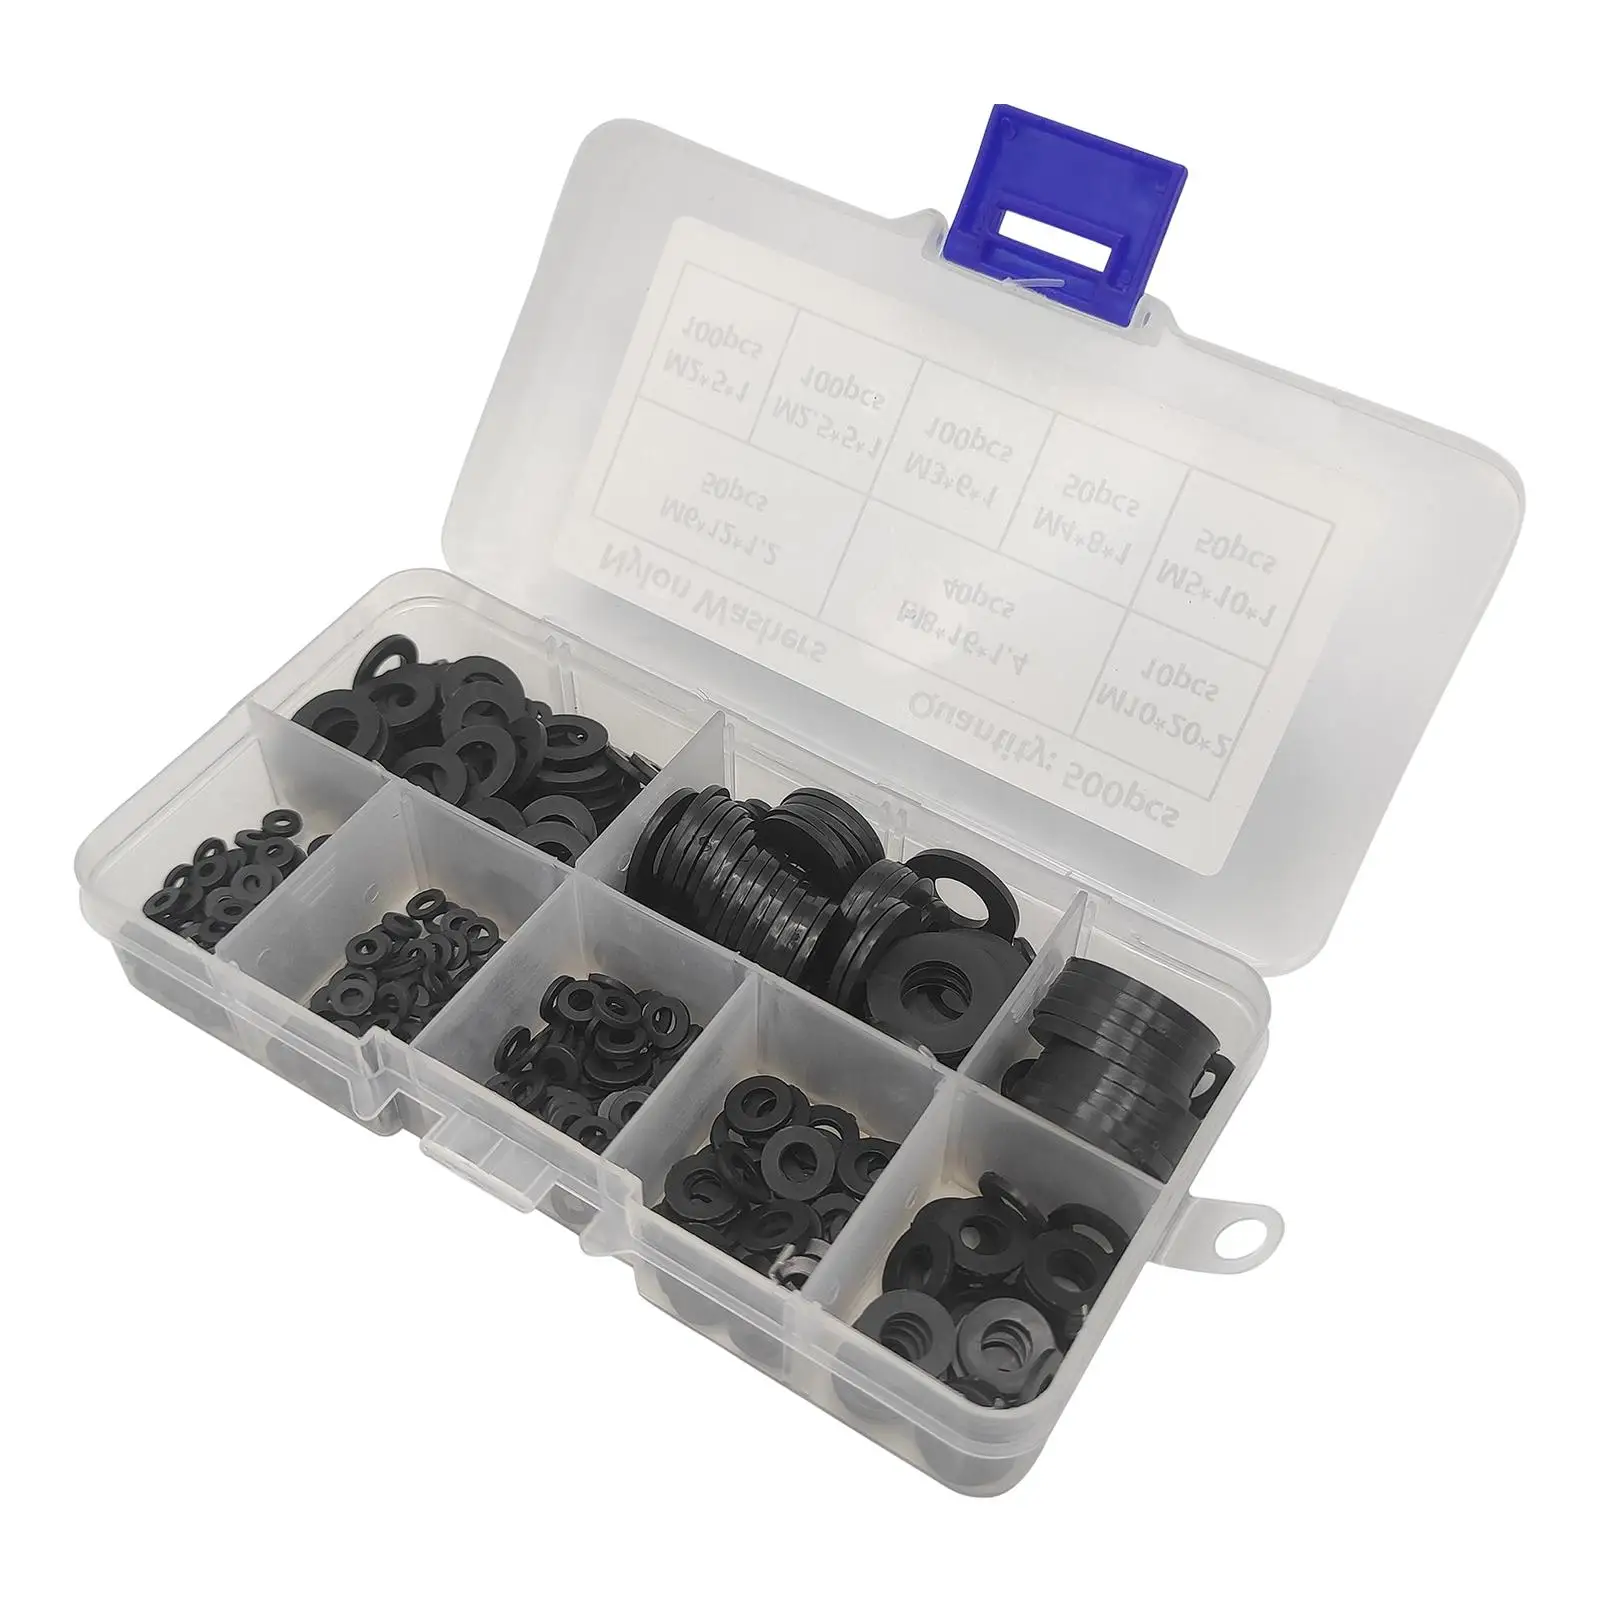 500Pcs Nylon Washer Spacers 8 Sizes with Box Insulation flat Assorted Flat Washers Set for Household Commerical Use